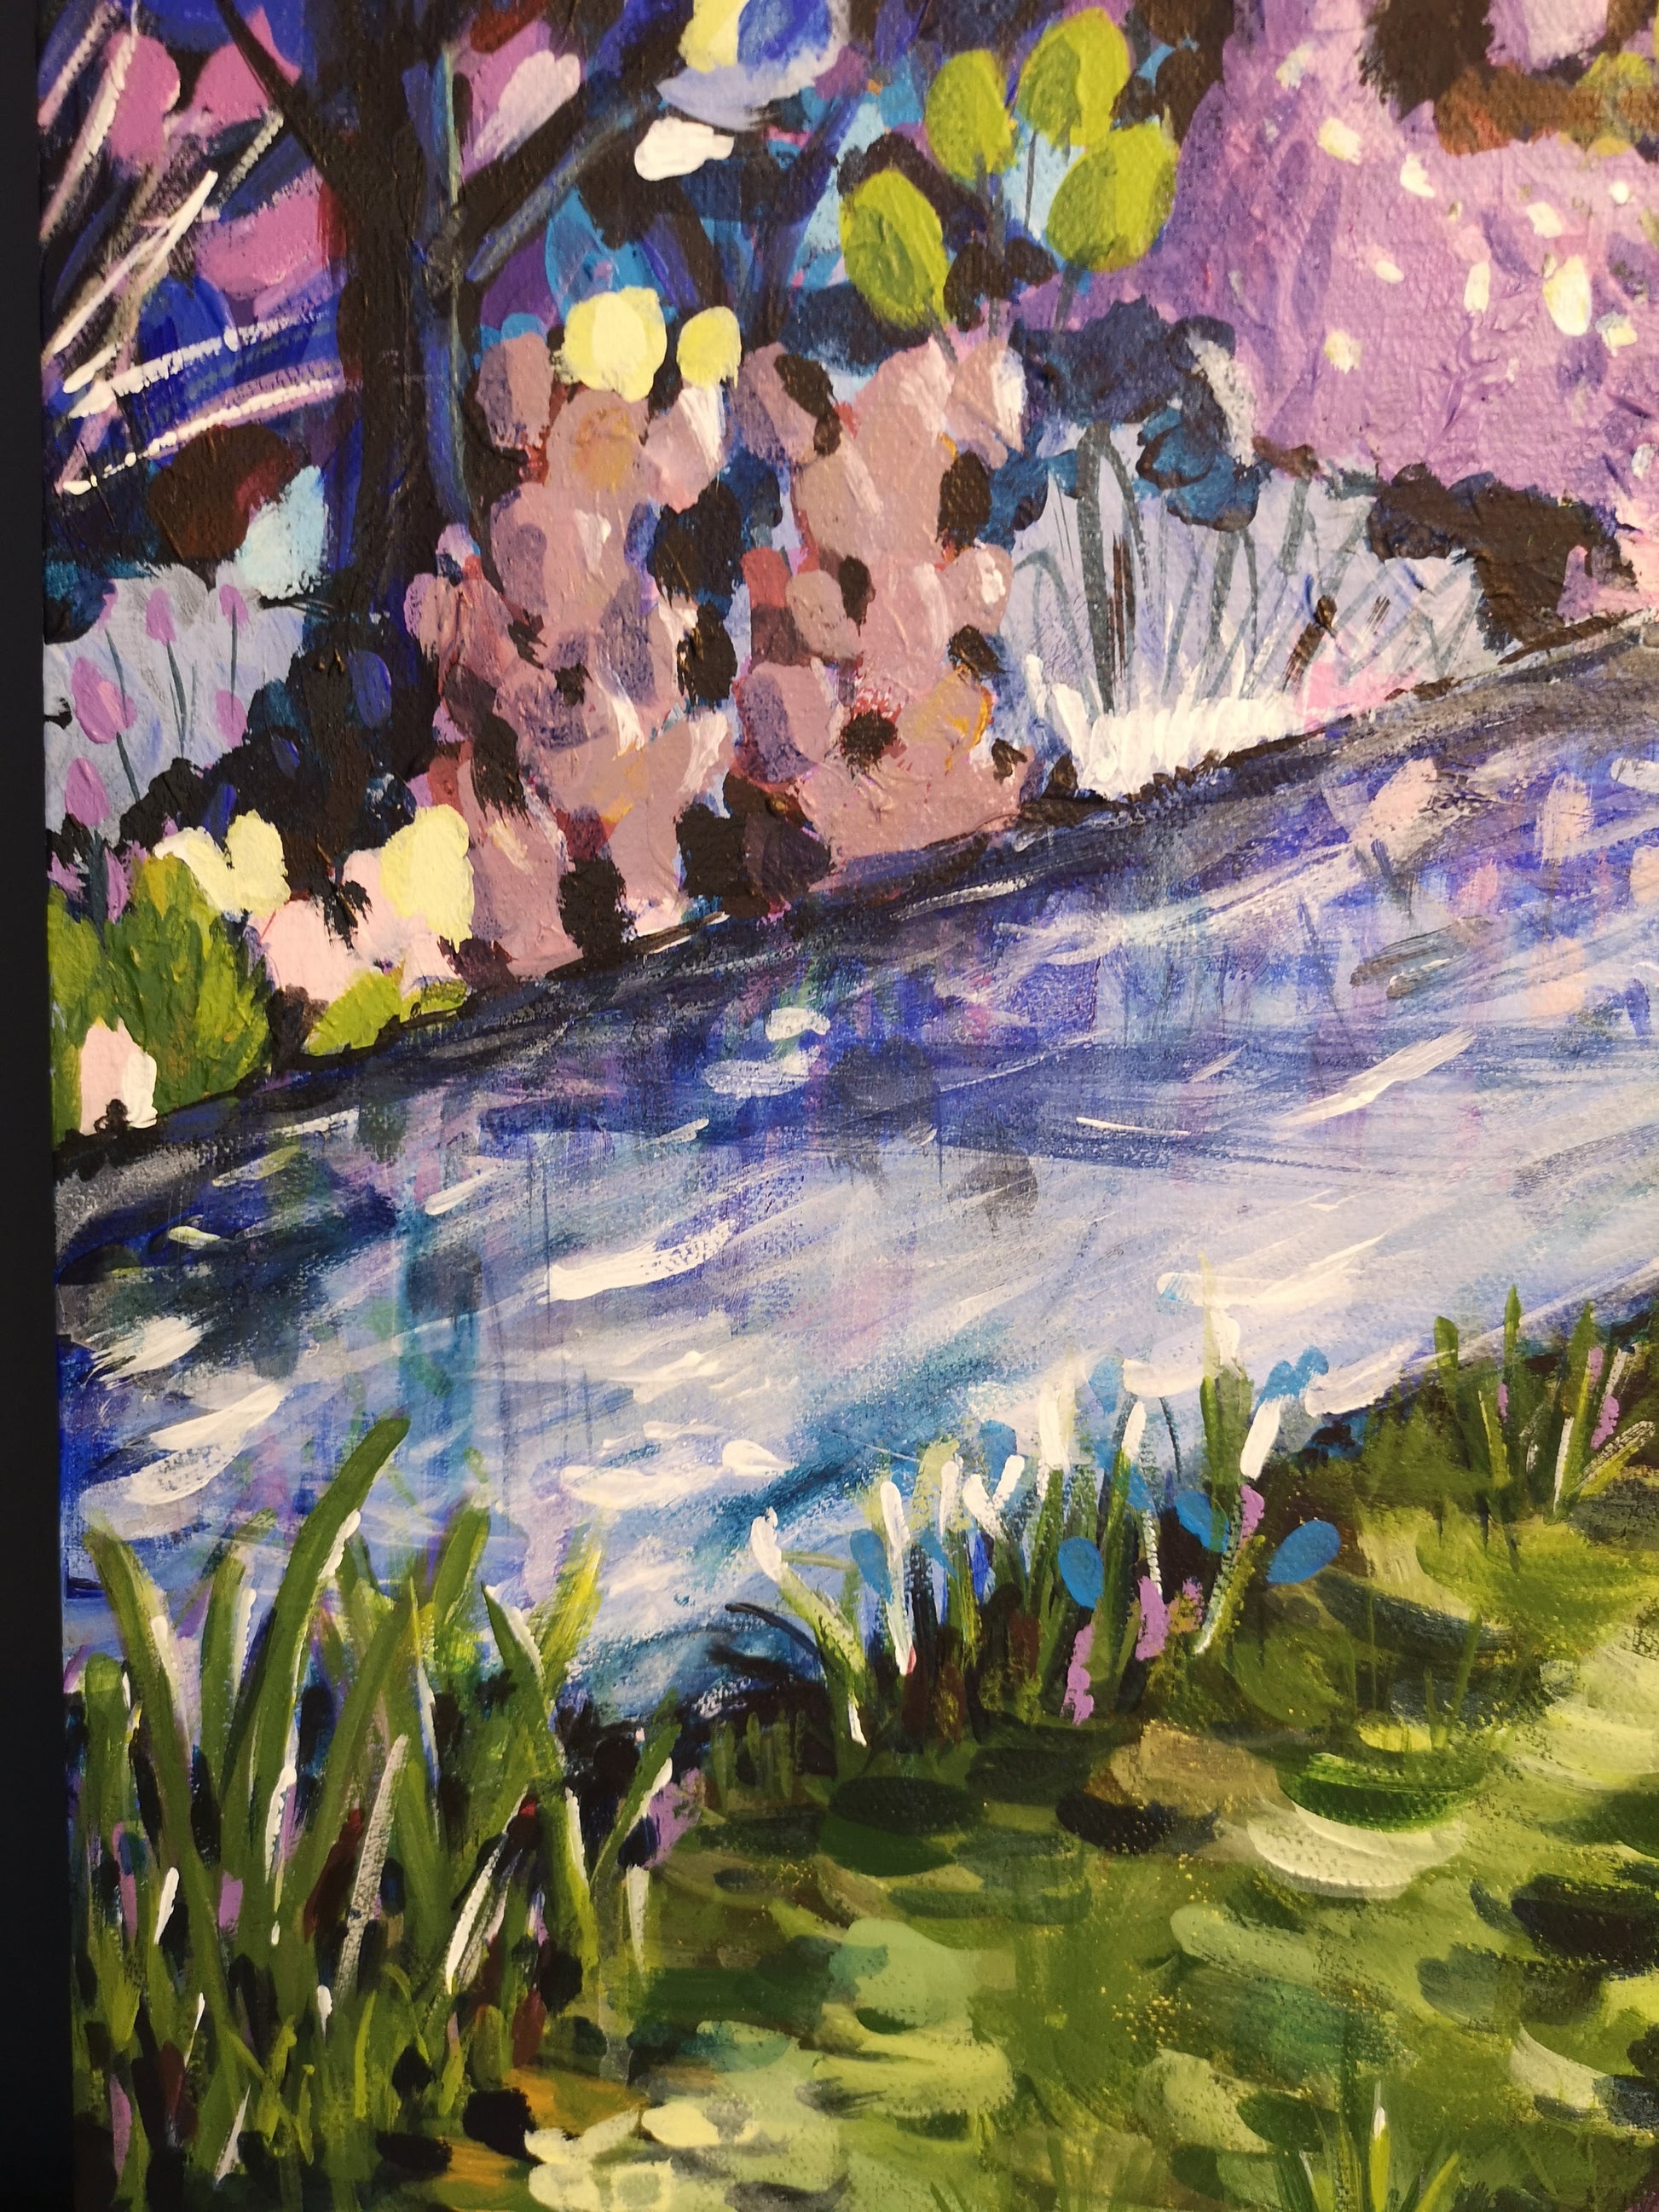 Close up of abstract landscape painting by Judy Century Art featuring stylised trees and bushes and flowing river in multicolour.